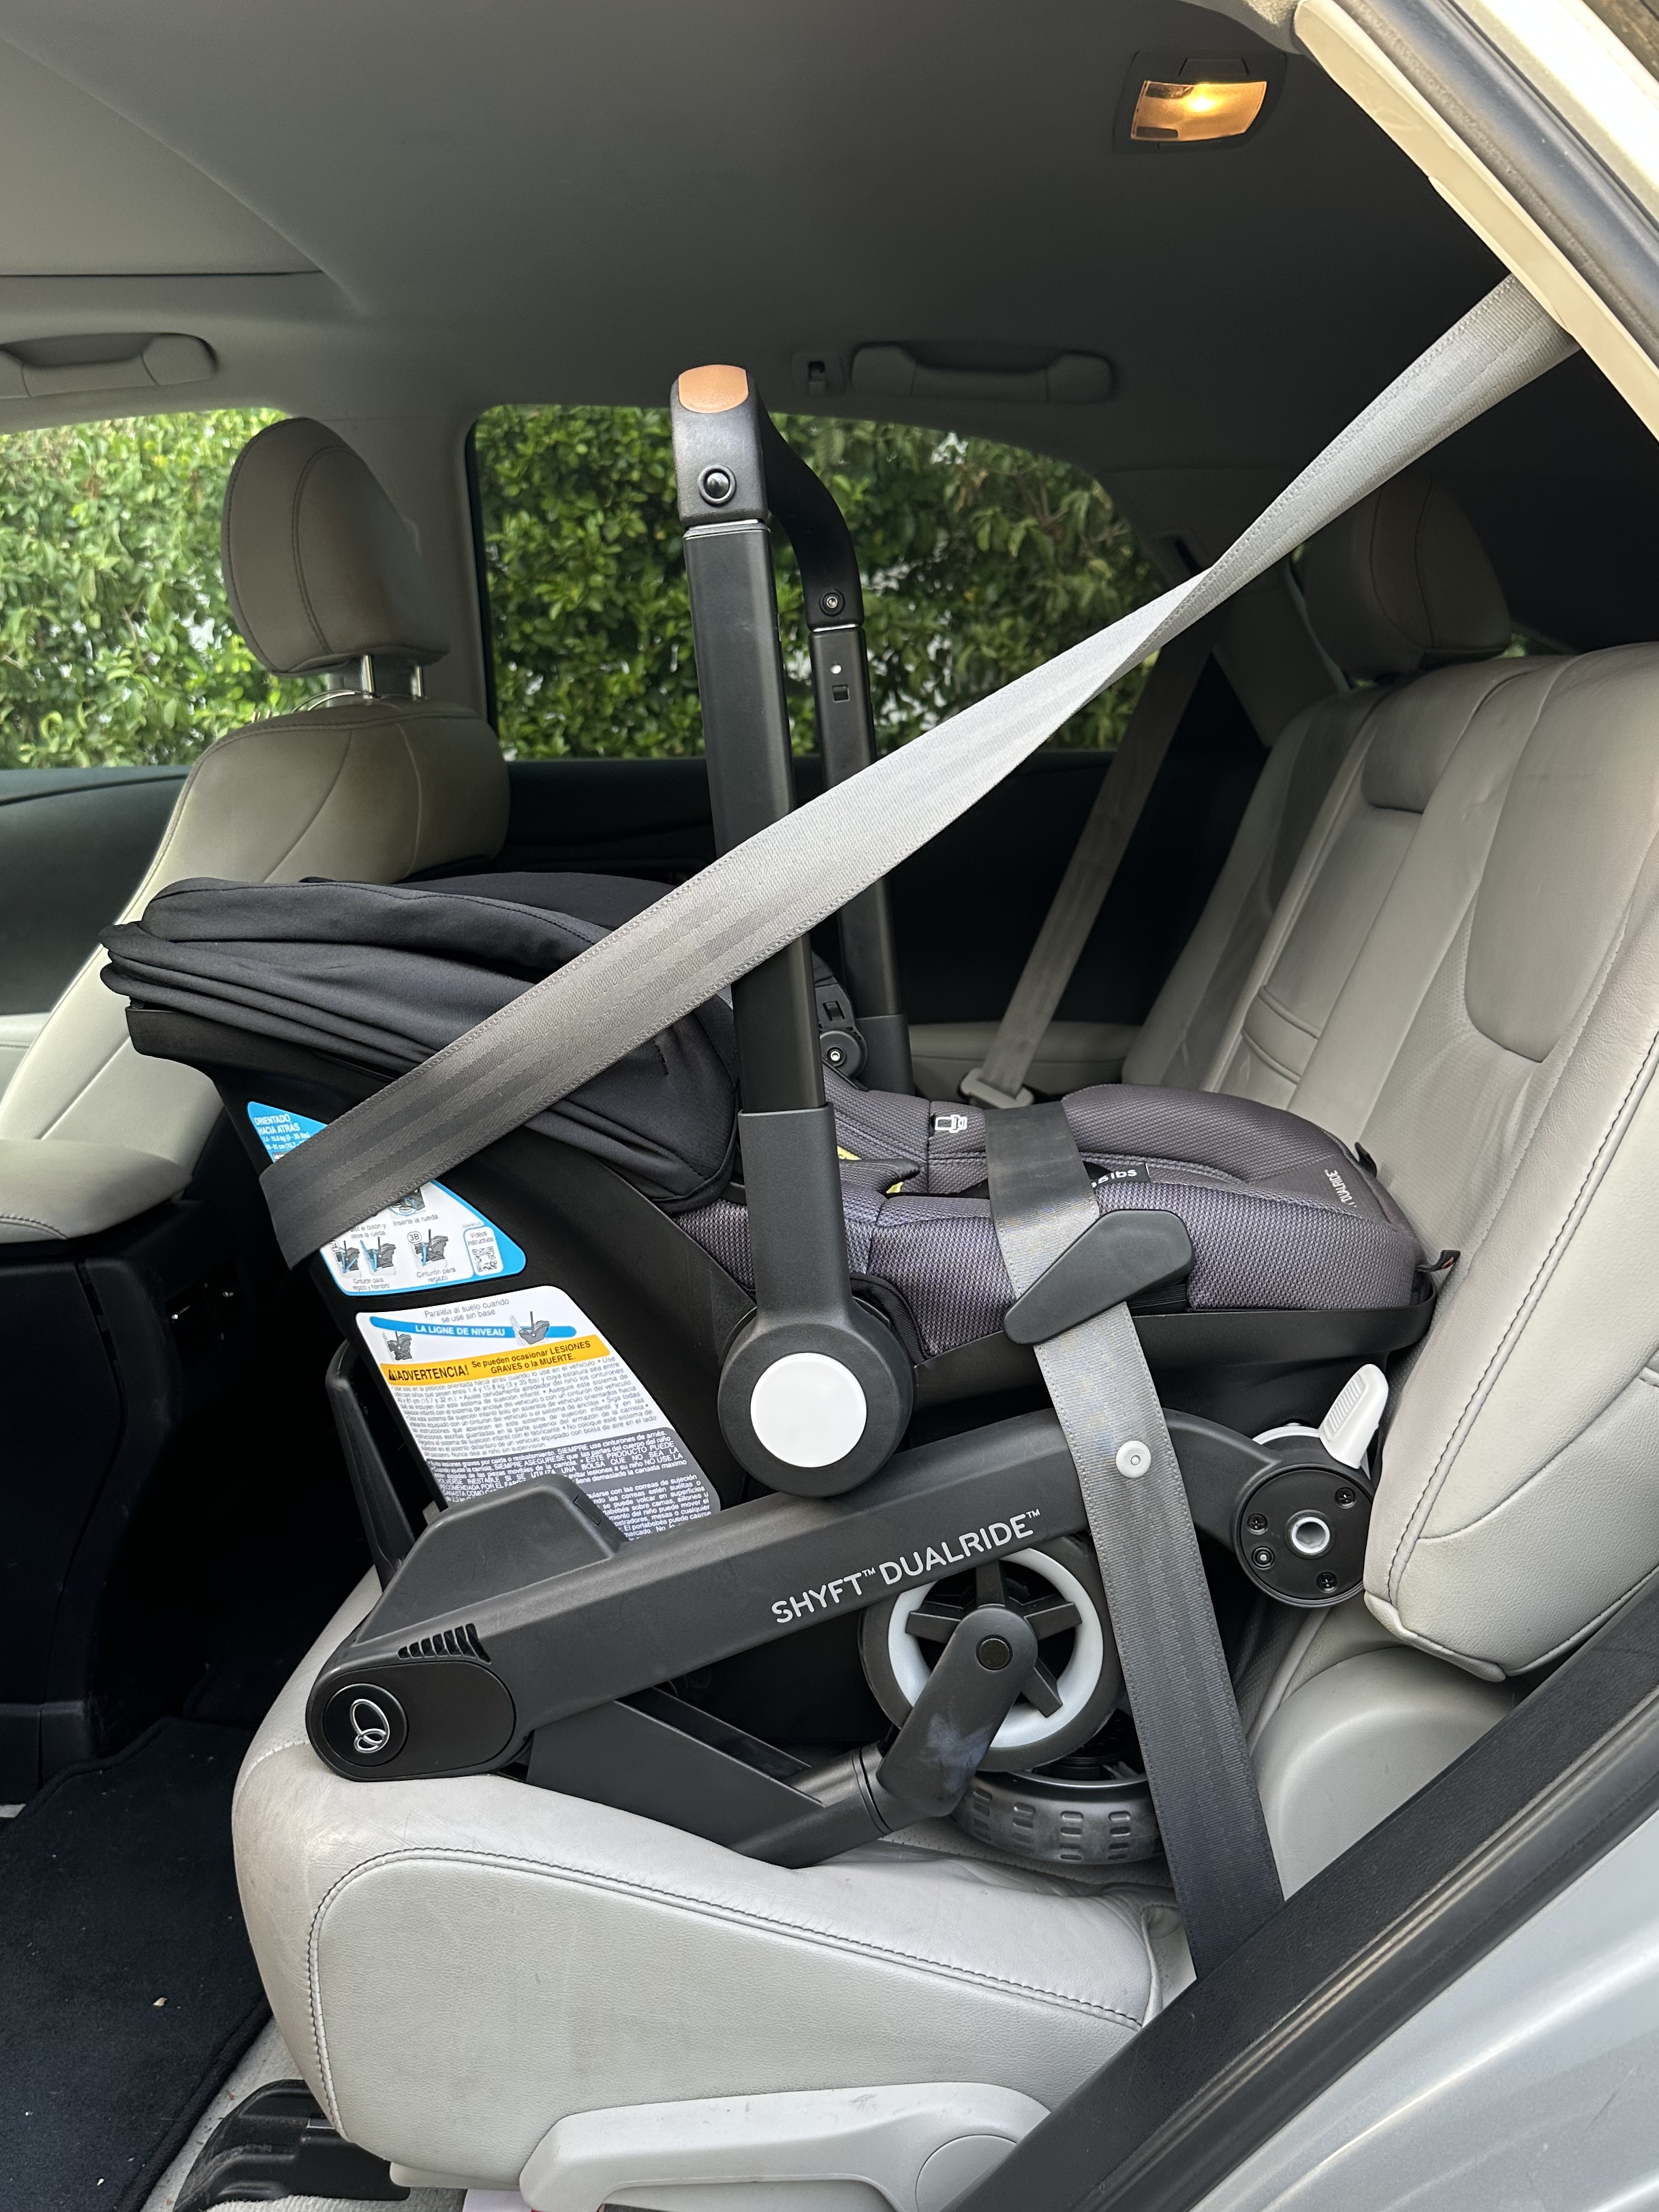 Evenflo Shyft DualRide Car Seat Review | Installed baseless with the wheels attached